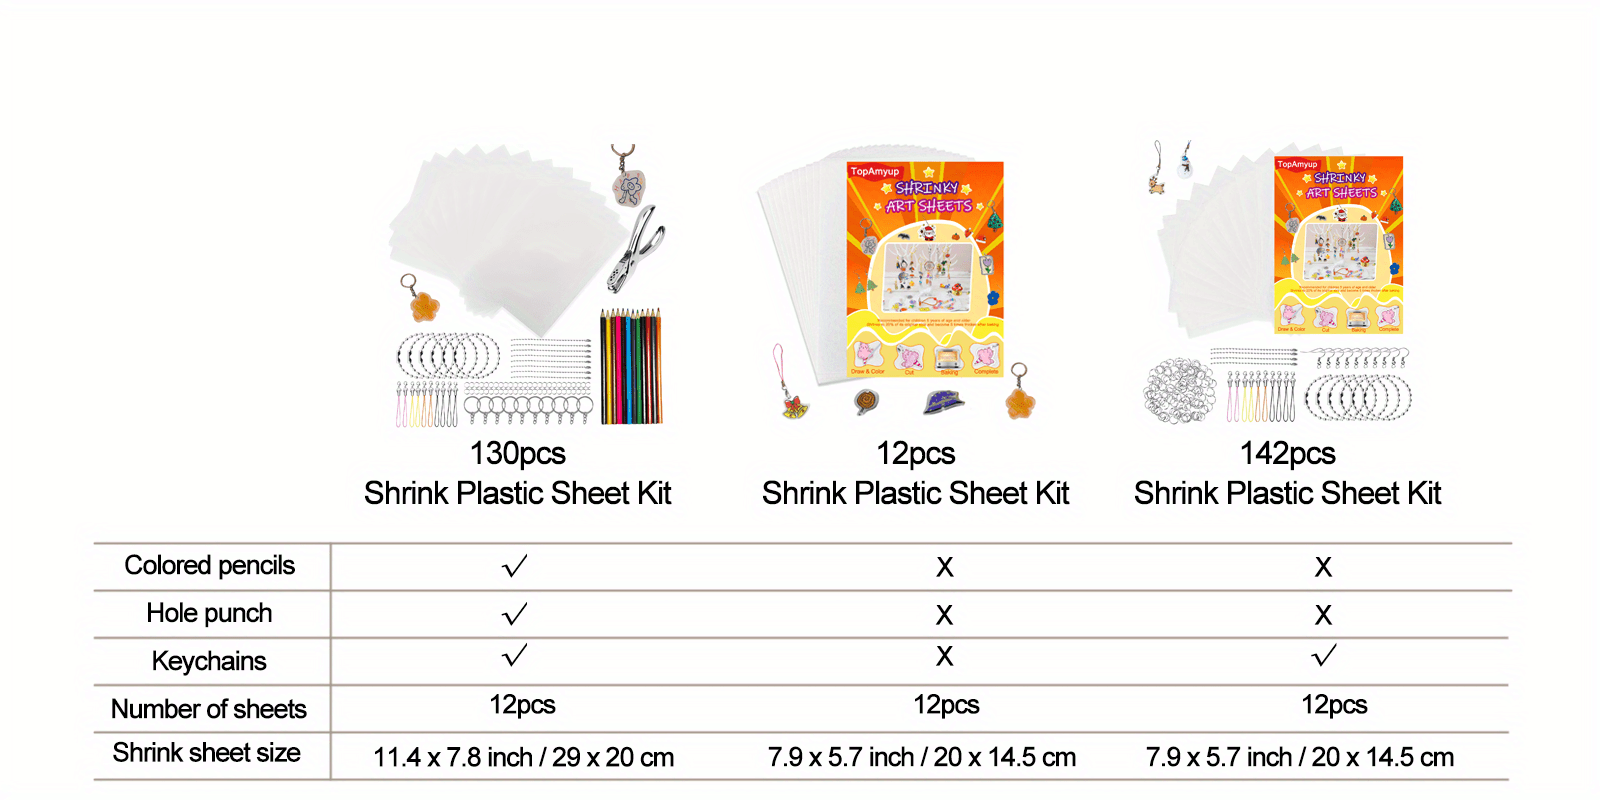 Mocoosy 148 Pcs Heat Shrink Plastic Sheets Kit for Shrinky Dink, Shrinky  Paper Art Films Clear Sanded Shrink Sheets Include Blank Shrink Papers with  Keychain Accessories and for Kids Creative Craft 